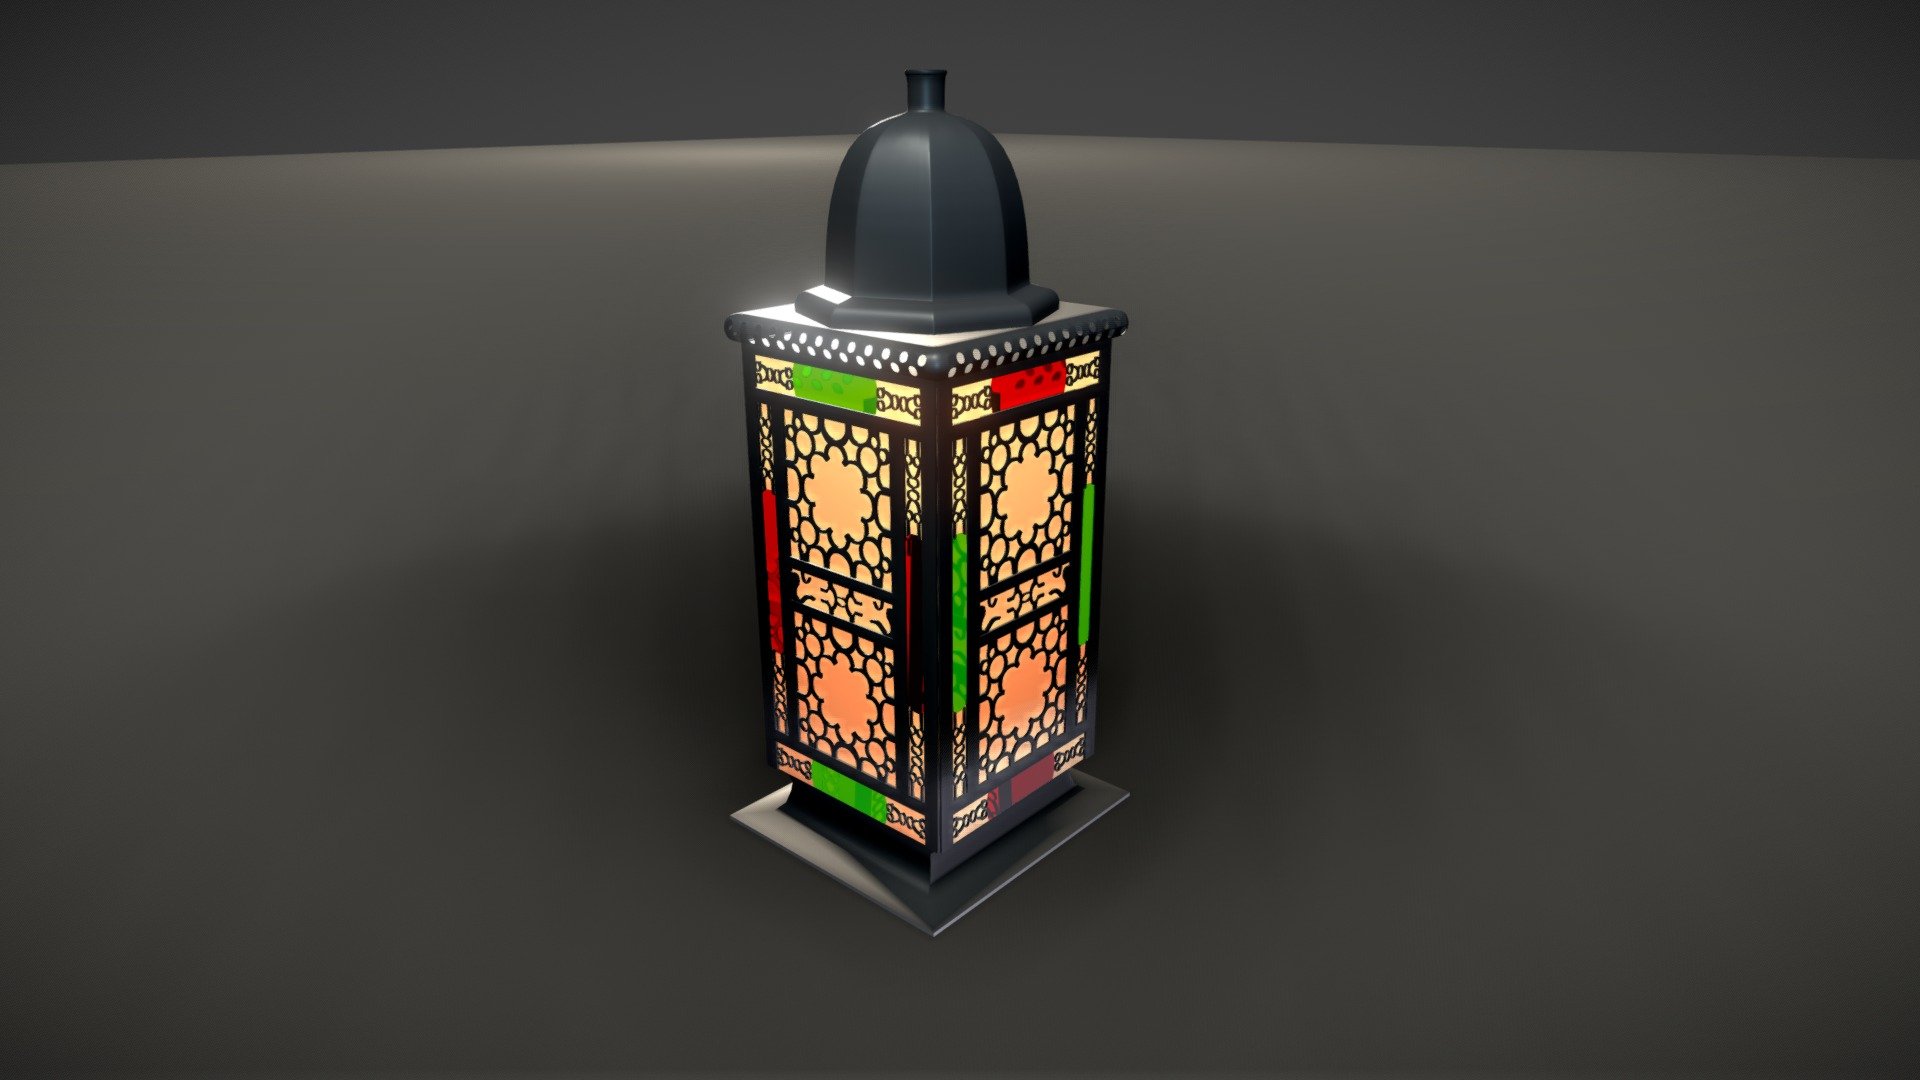 this is a 3D model of an Arabic lantern made in cinema 4D and rendered with octane render engine the textures are included

this model has 227417 vertex 145096 polygons

for more of my work you can find me on my social media here Twitter: https://twitter.com/deltagrafics 
Facebook: https://www.facebook.com/profile.php?id=100010856314523 
deviantart : https://www.deviantart.com/deltagrafics 
youtube : https://www.youtube.com/channel/UCvyB23M9wg2Ou23G2aX407Q - arabic lantern - 3D model by DELTA (@DELTAgraphics) 3d model